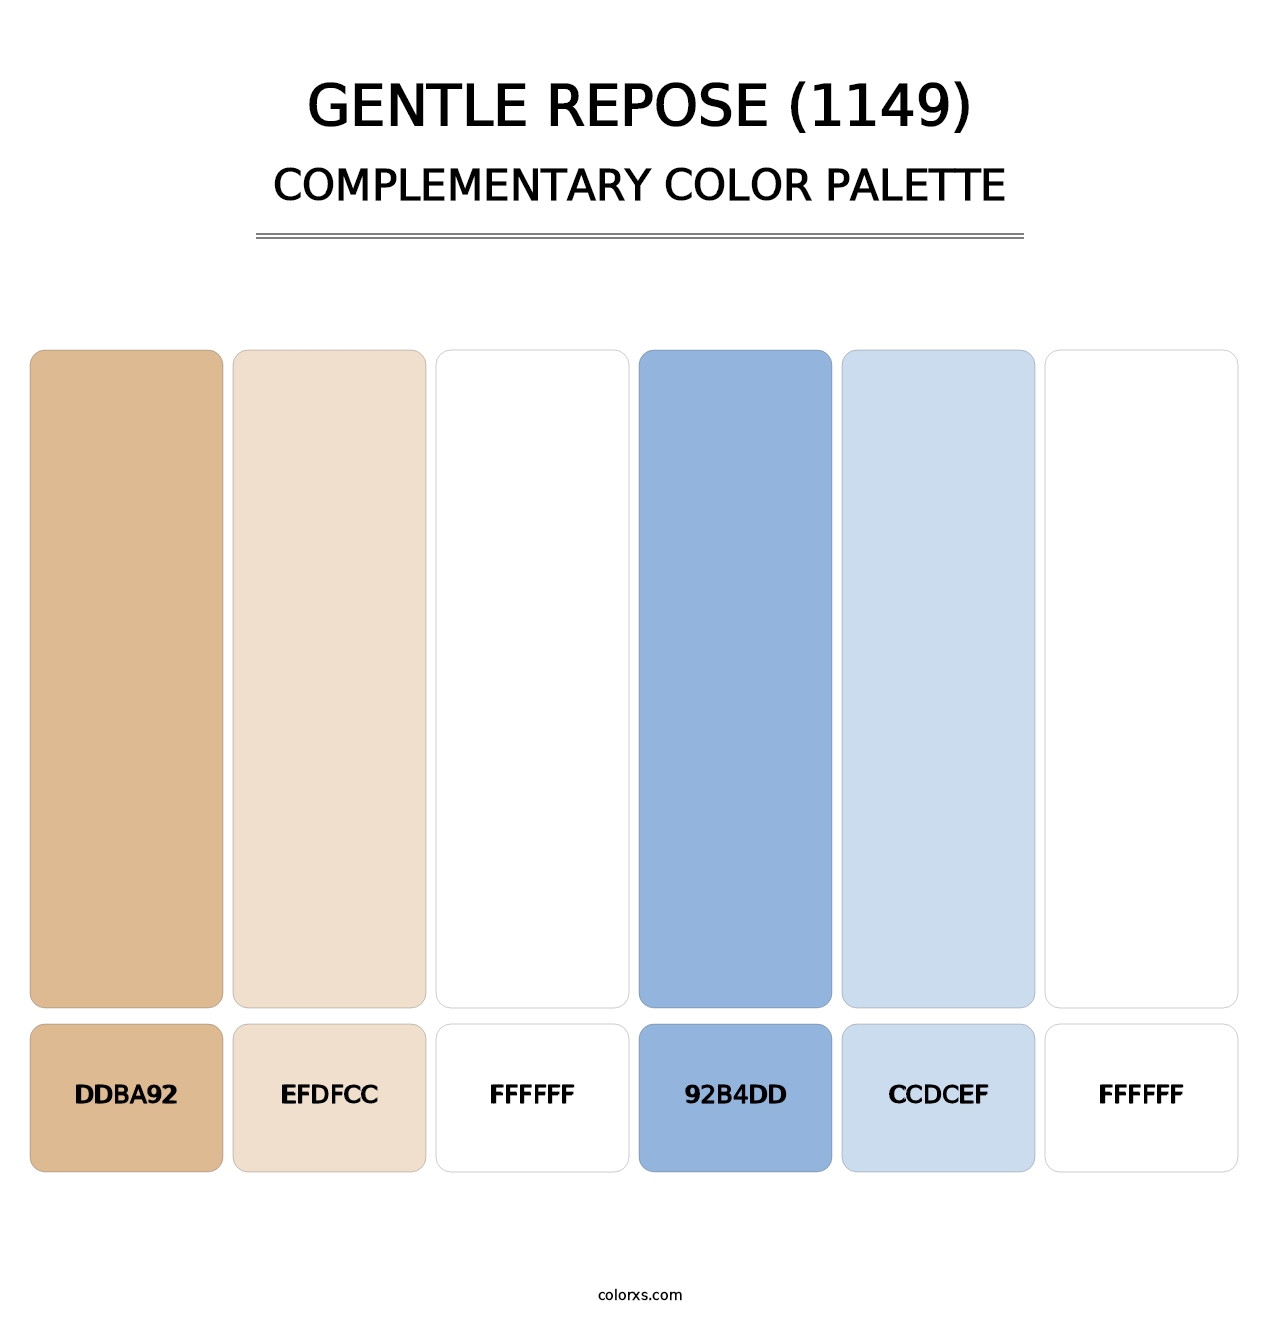 Gentle Repose (1149) - Complementary Color Palette